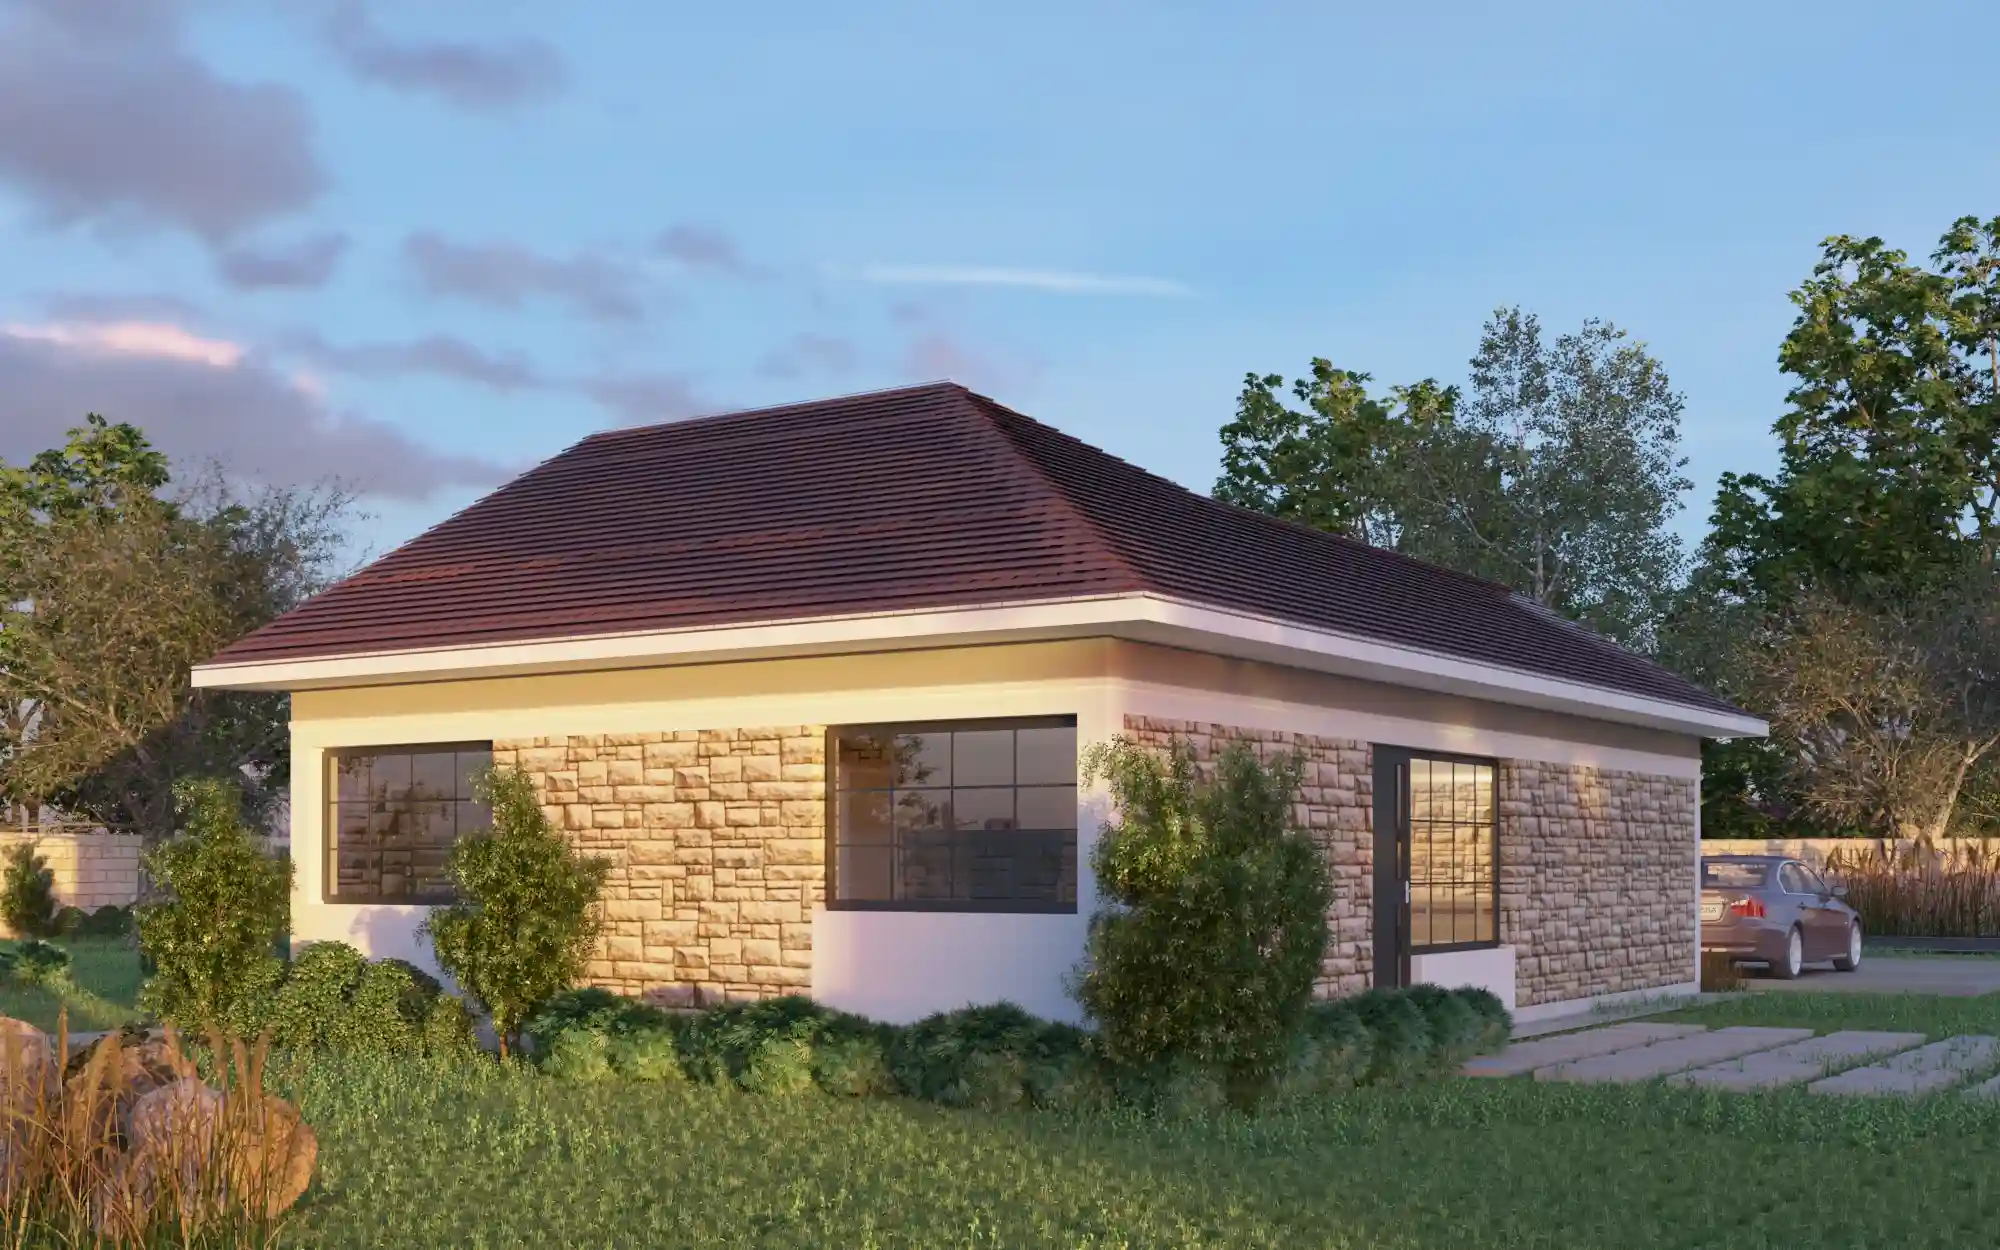 3 Bedroom Bungalow - ID 31171 - 31171_rear.jpg from Inuua Tujenge house plans with 3 bedrooms and 2 bathrooms. ( bungalow )